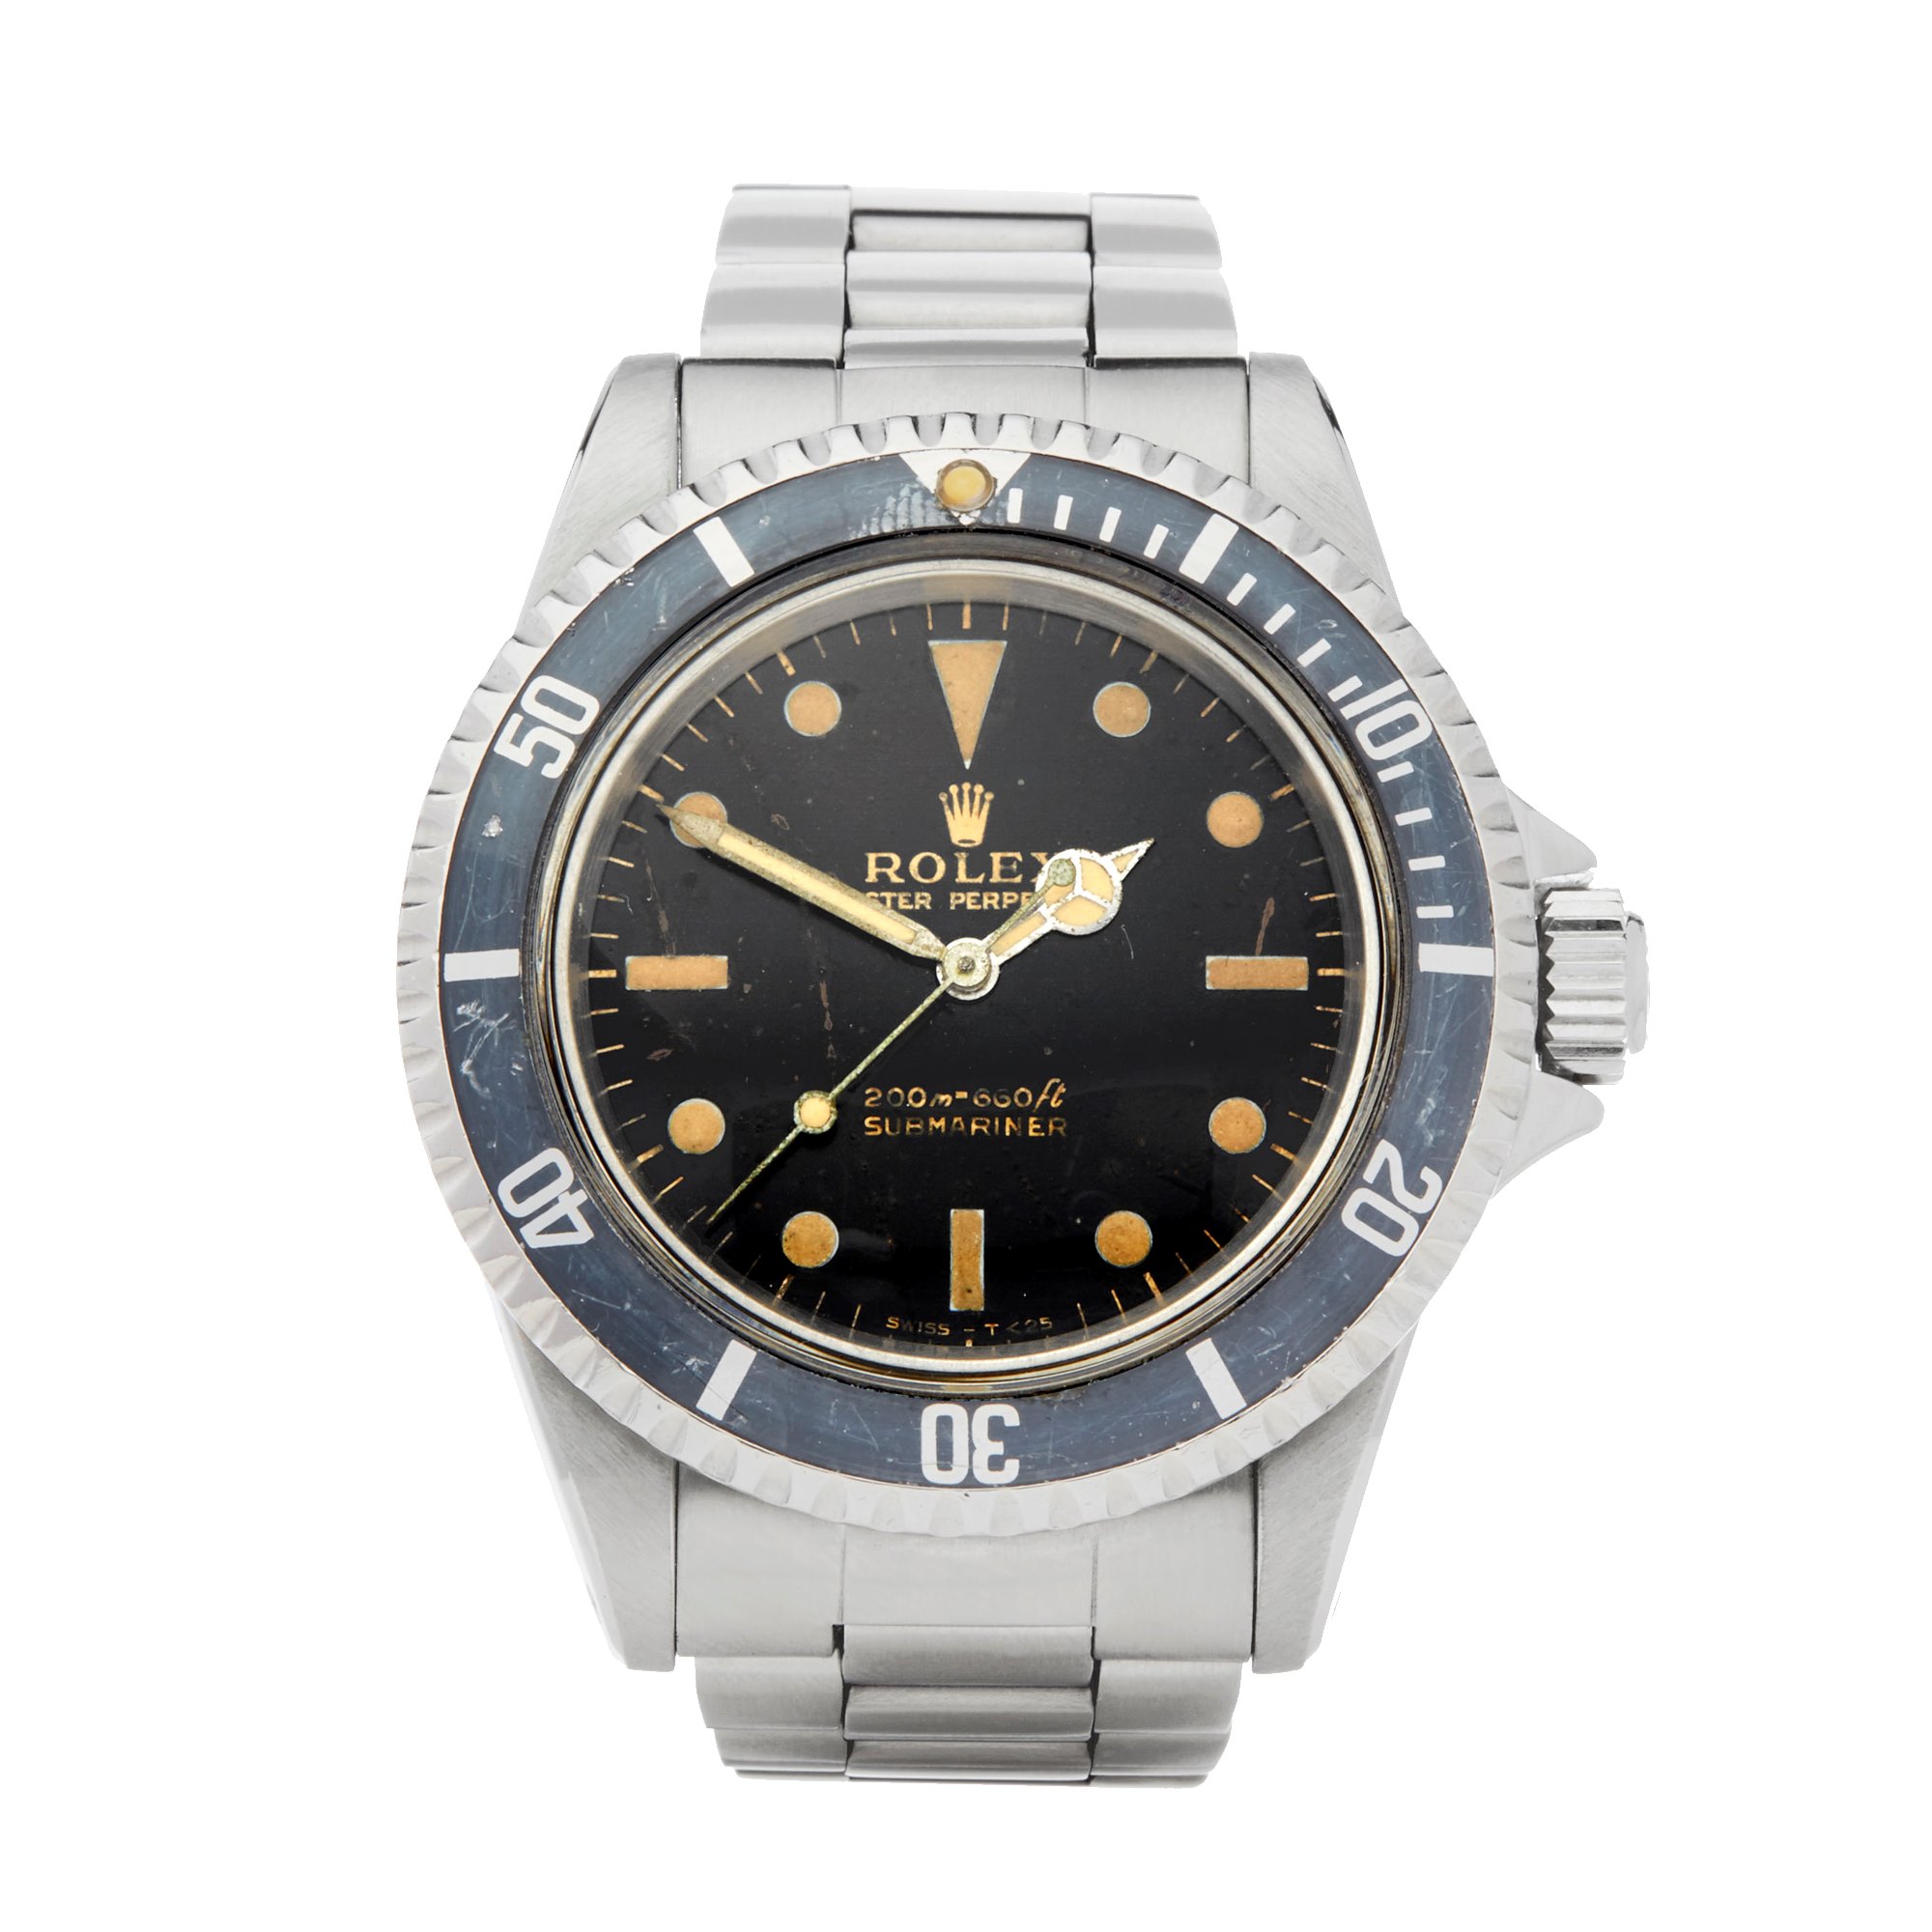 Rolex Submariner No Date Gilt Gloss Meters First Stainless Steel - 5513 Stainless Steel 5513